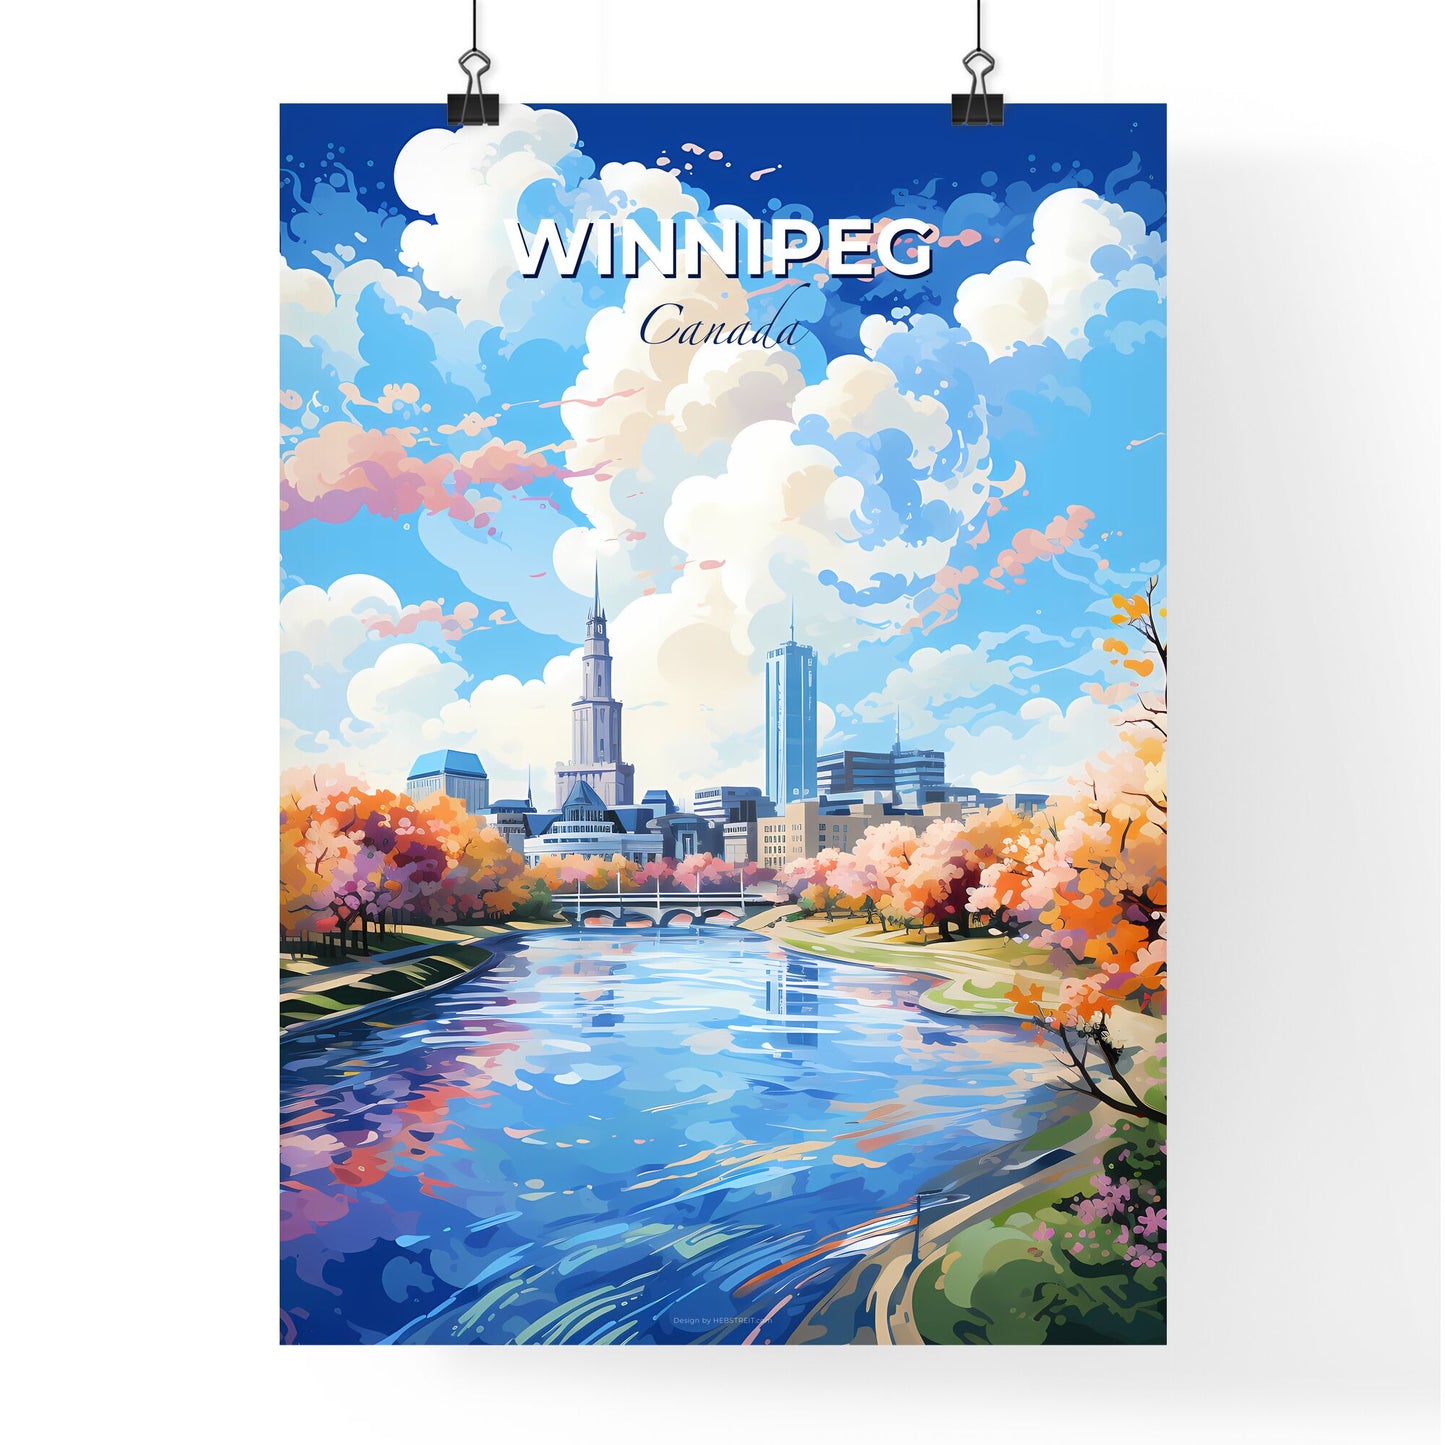 Winnipeg Canada Skyline - A River With Trees And A City In The Background - Customizable Travel Gift Default Title